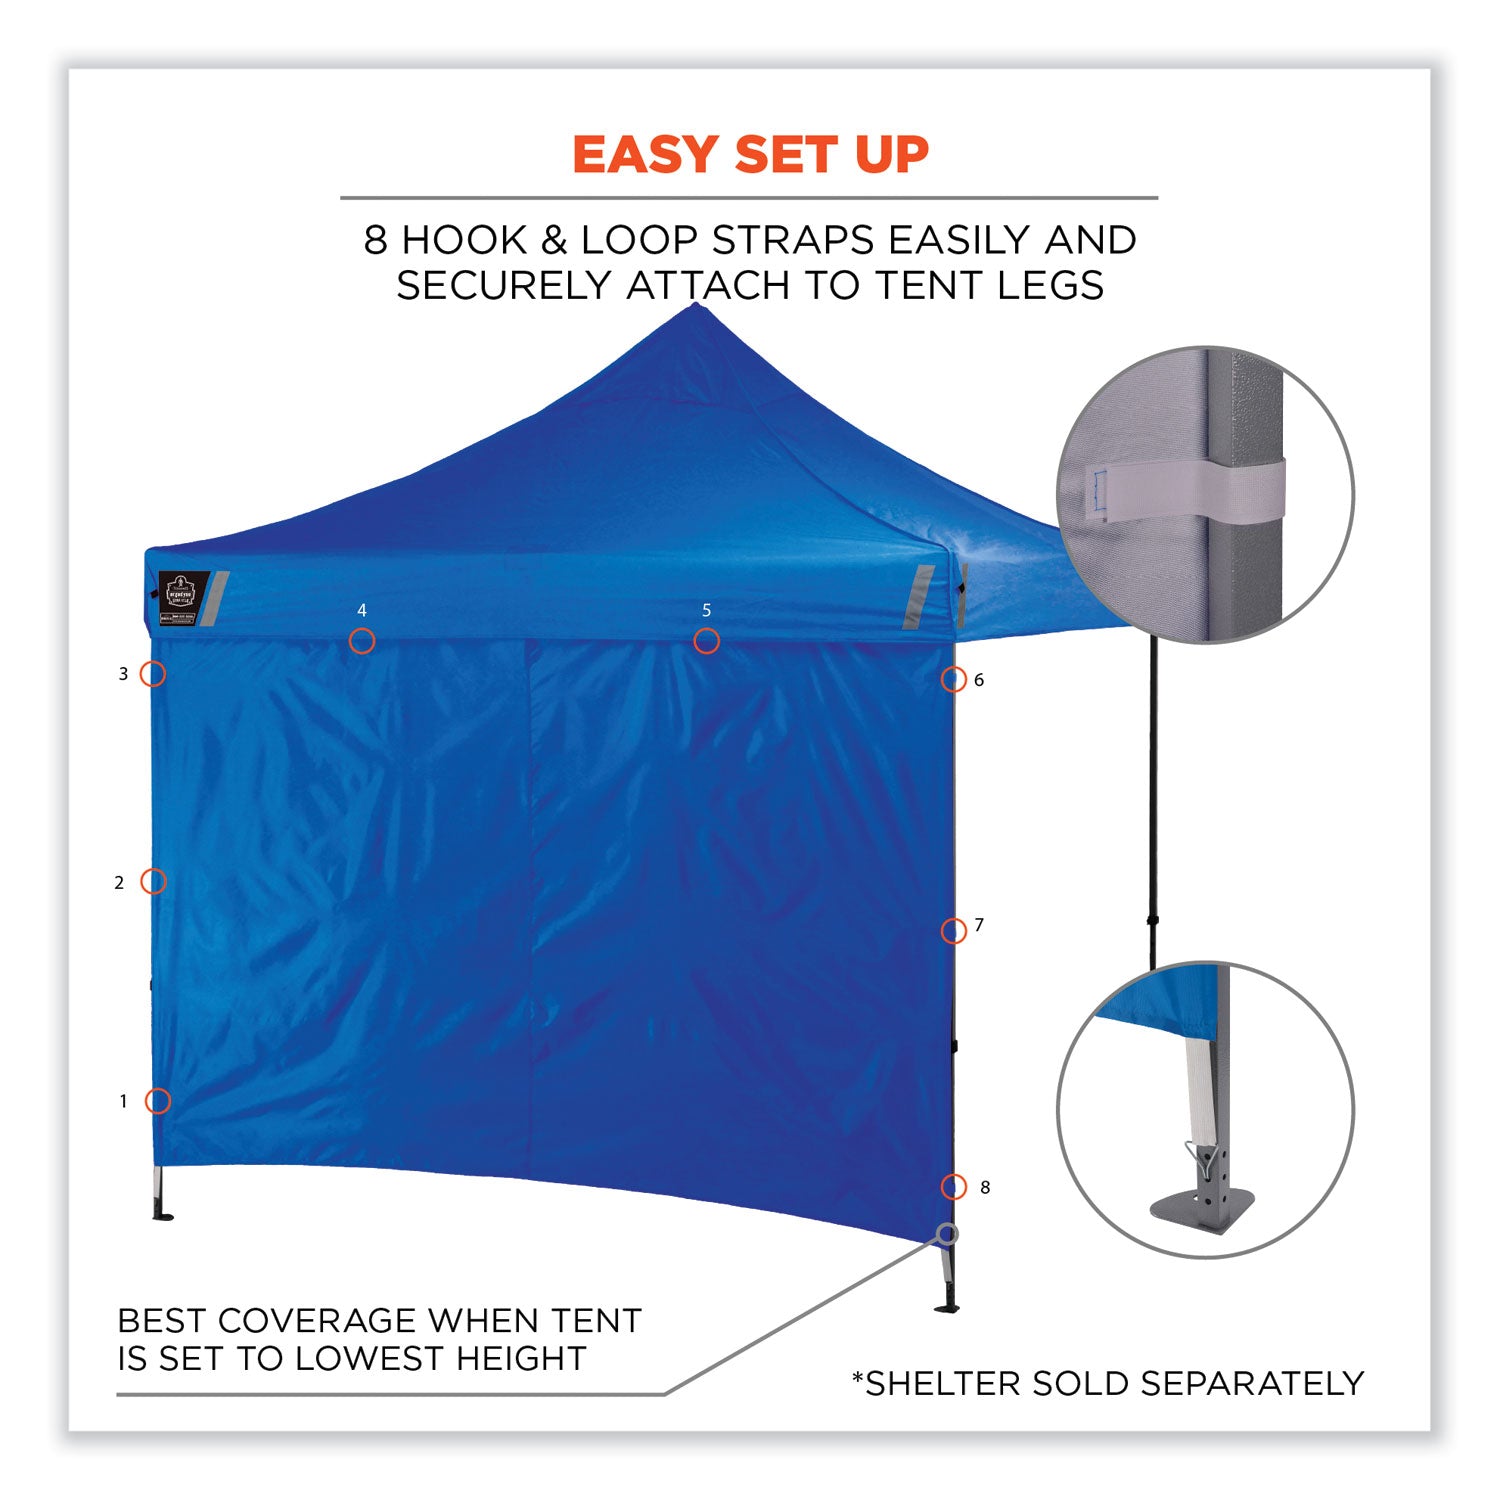 shax-6098-pop-up-tent-sidewall-single-skin-10-ft-x-10-ft-polyester-blue-ships-in-1-3-business-days_ego12997 - 2